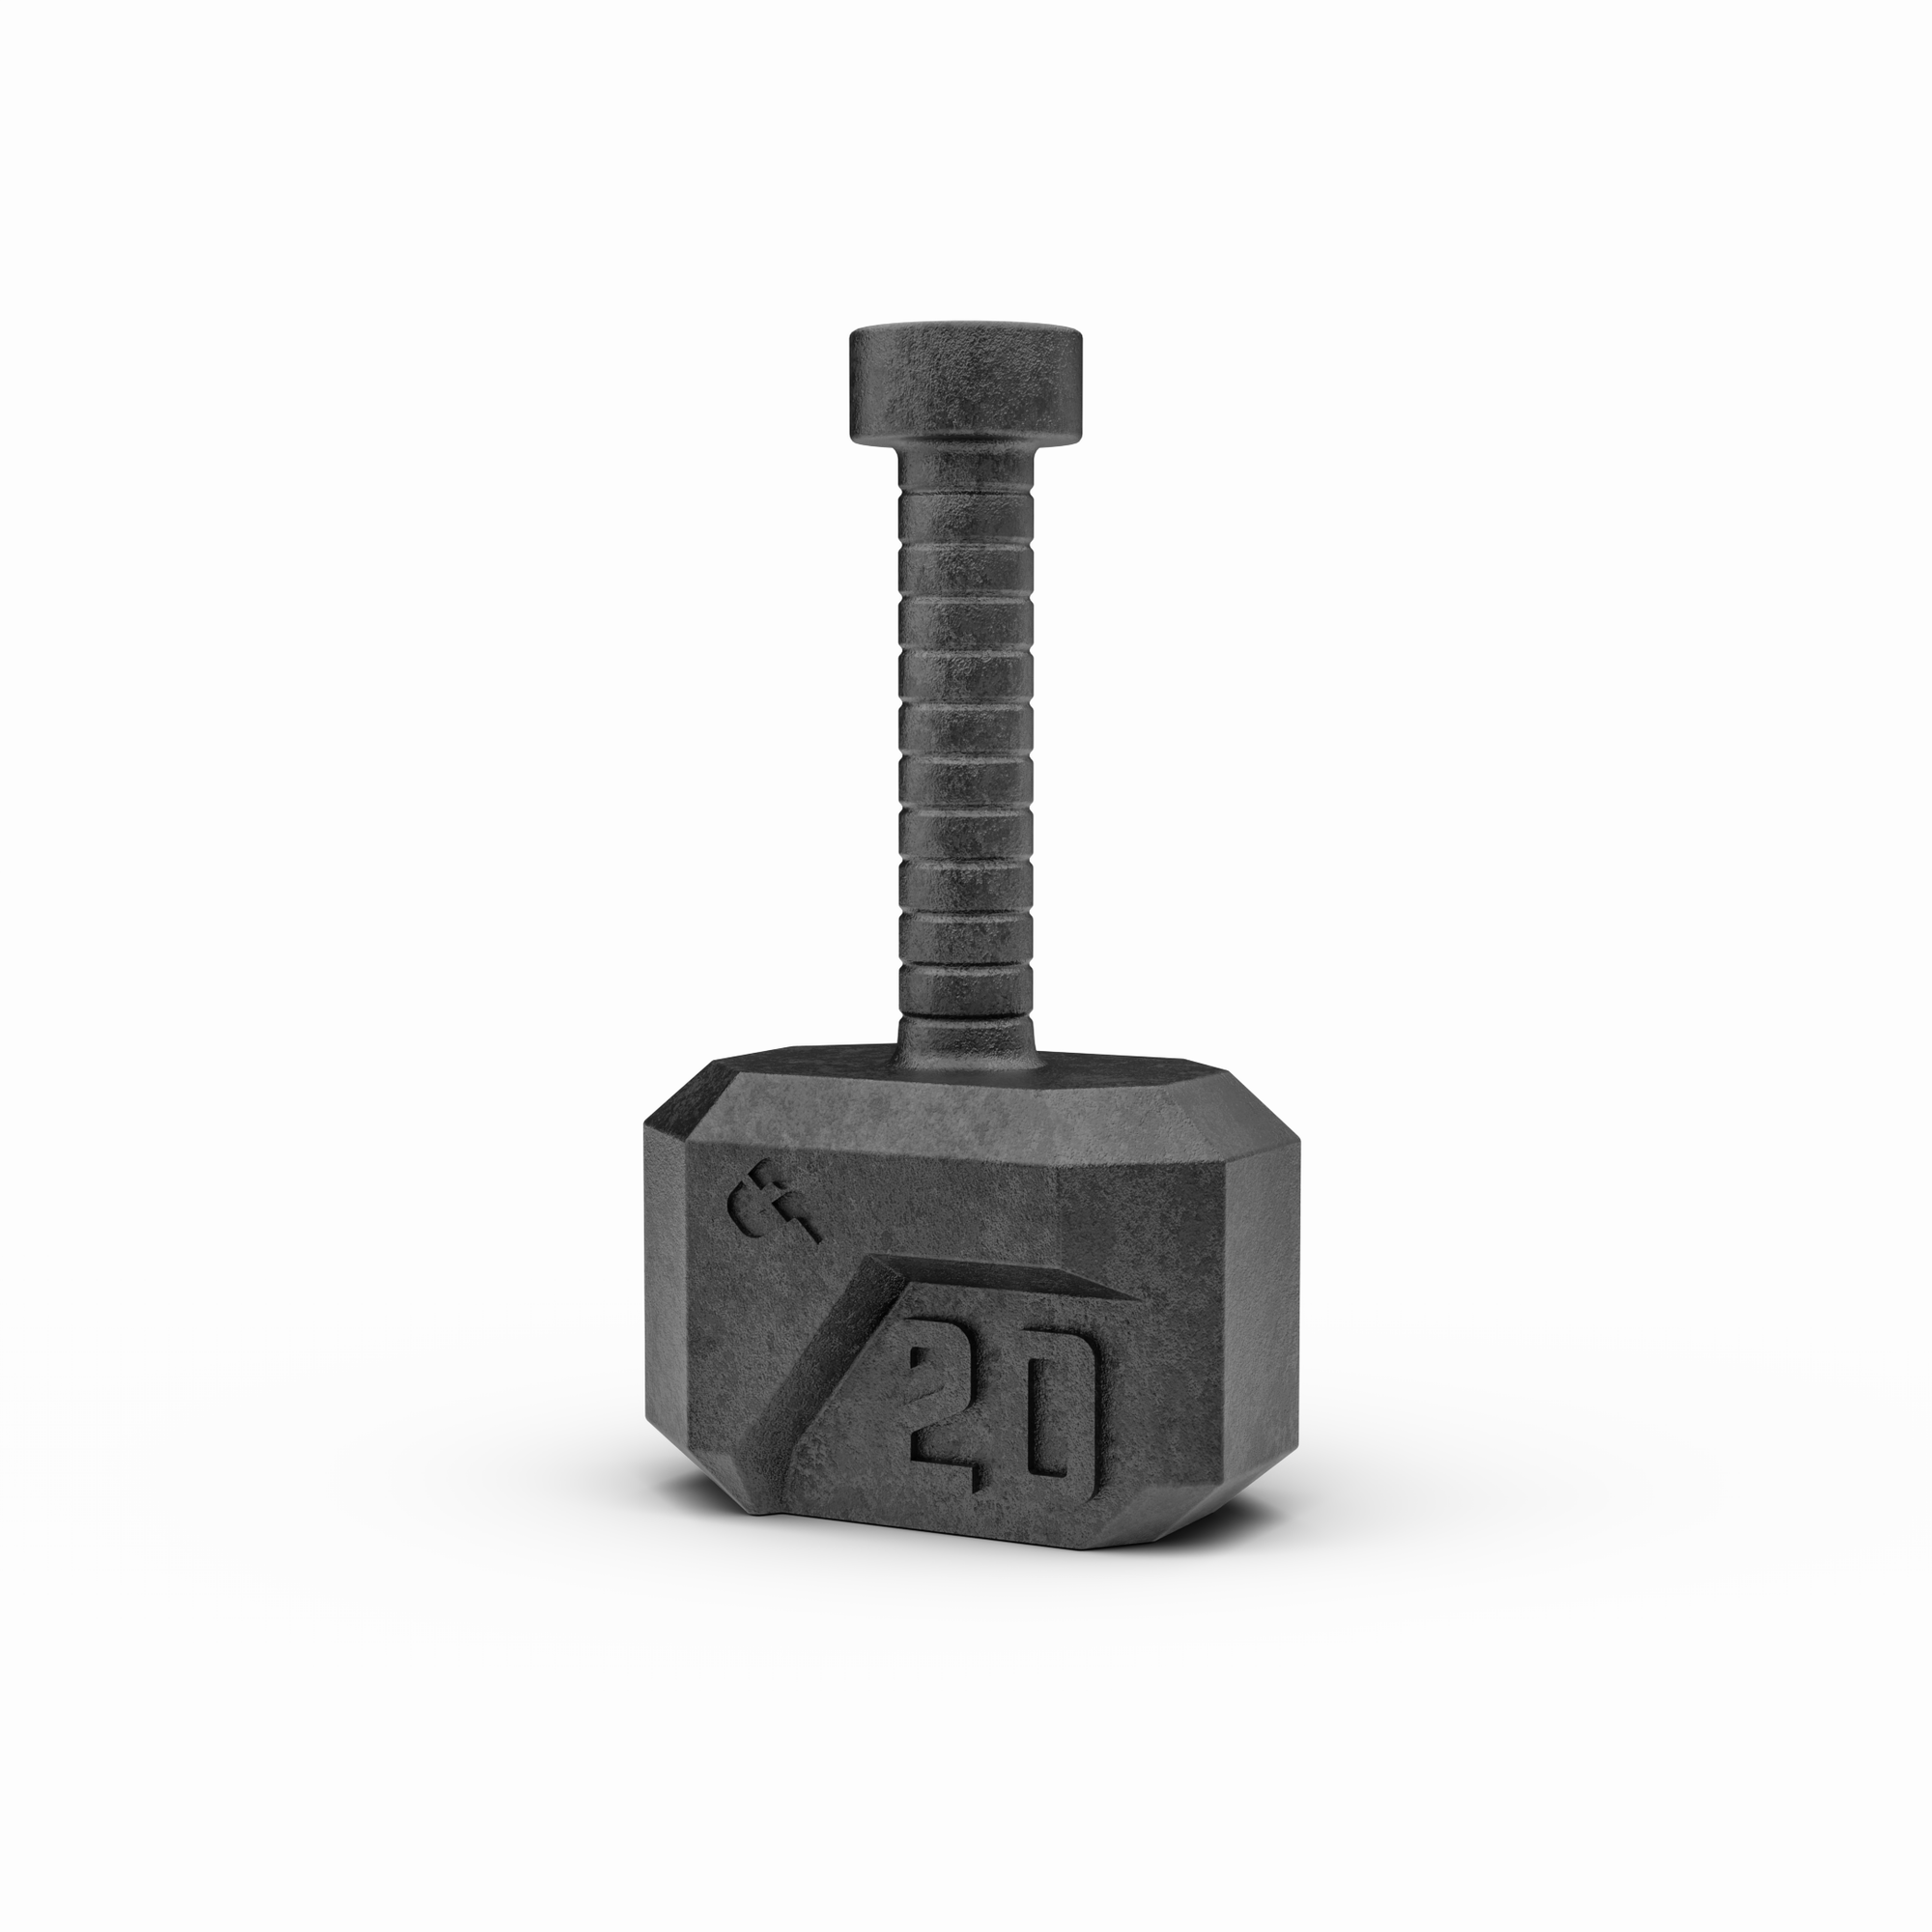 Thor's Hammer - 20kg (Limited Edition)